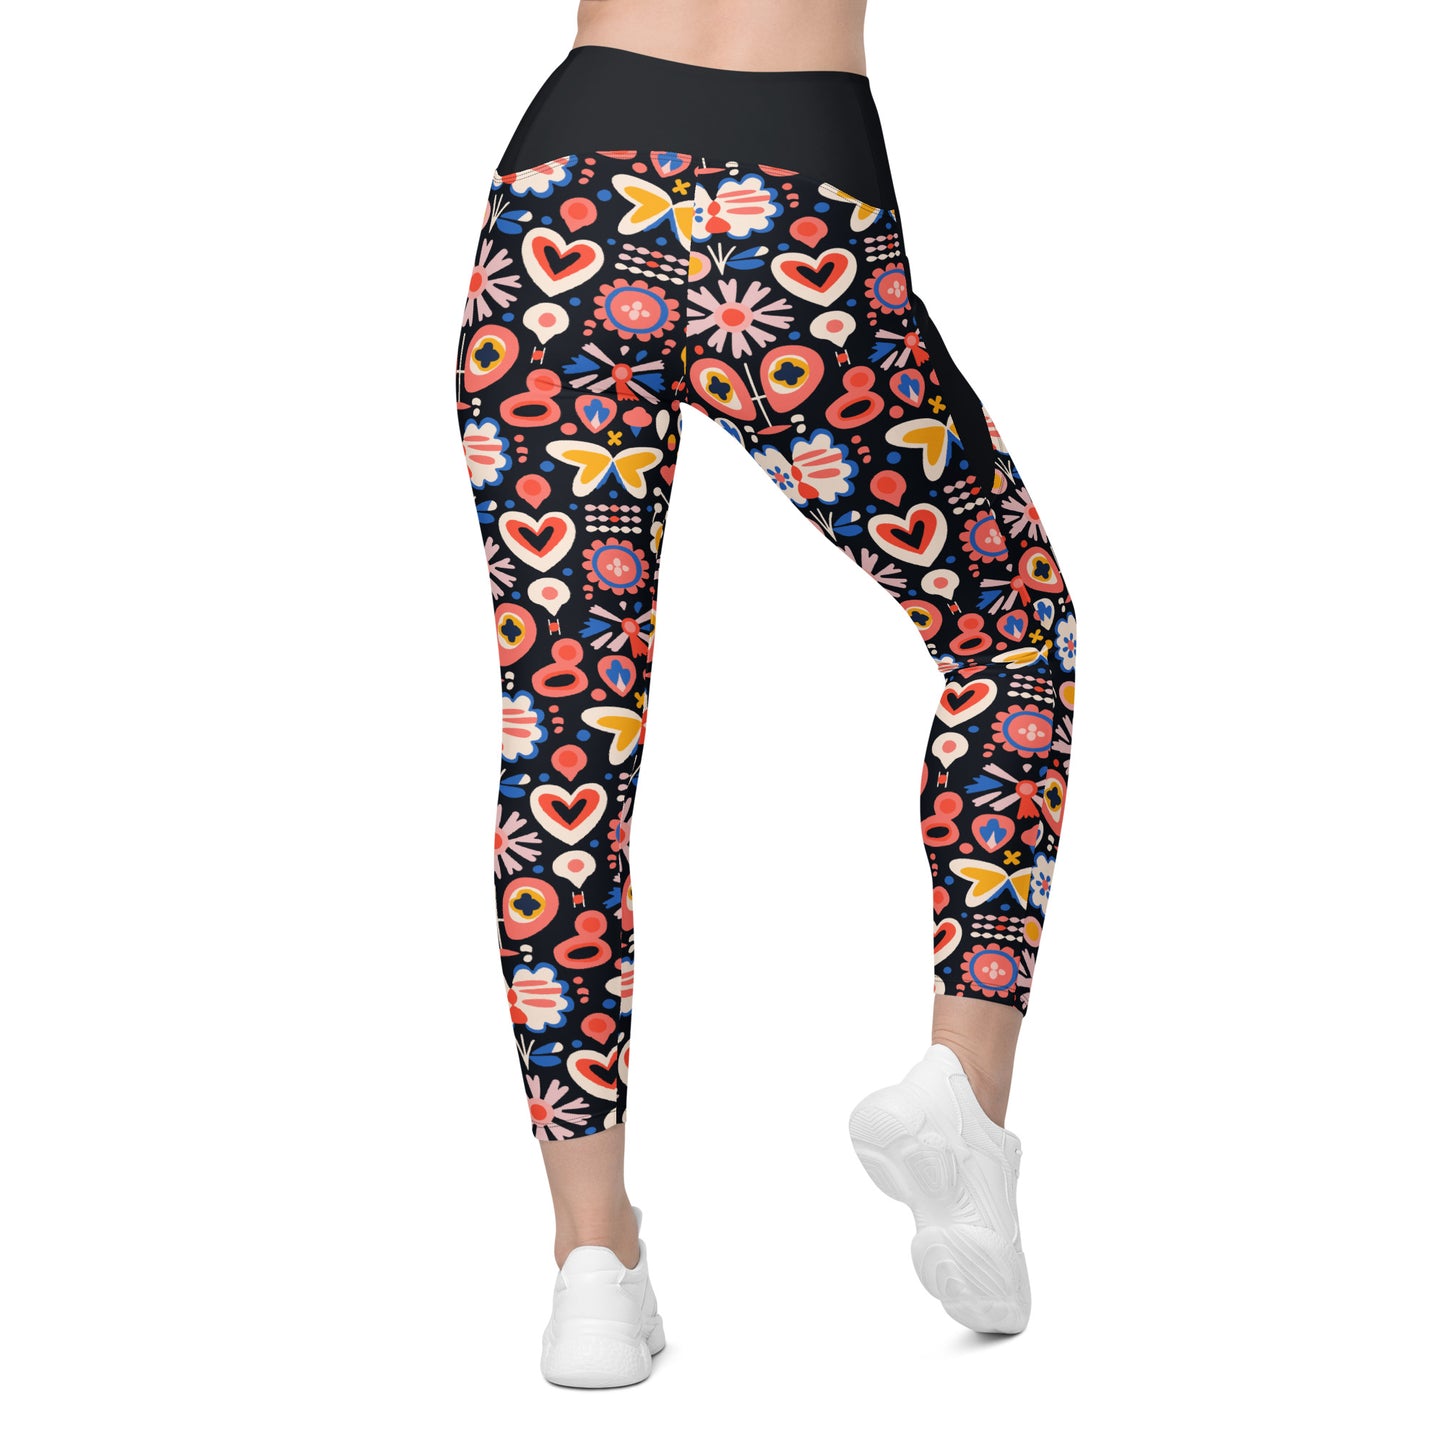 Alpen Nacht Crossover Waist 7/8 Recycled Yoga Leggings / Yoga Pants with Pockets